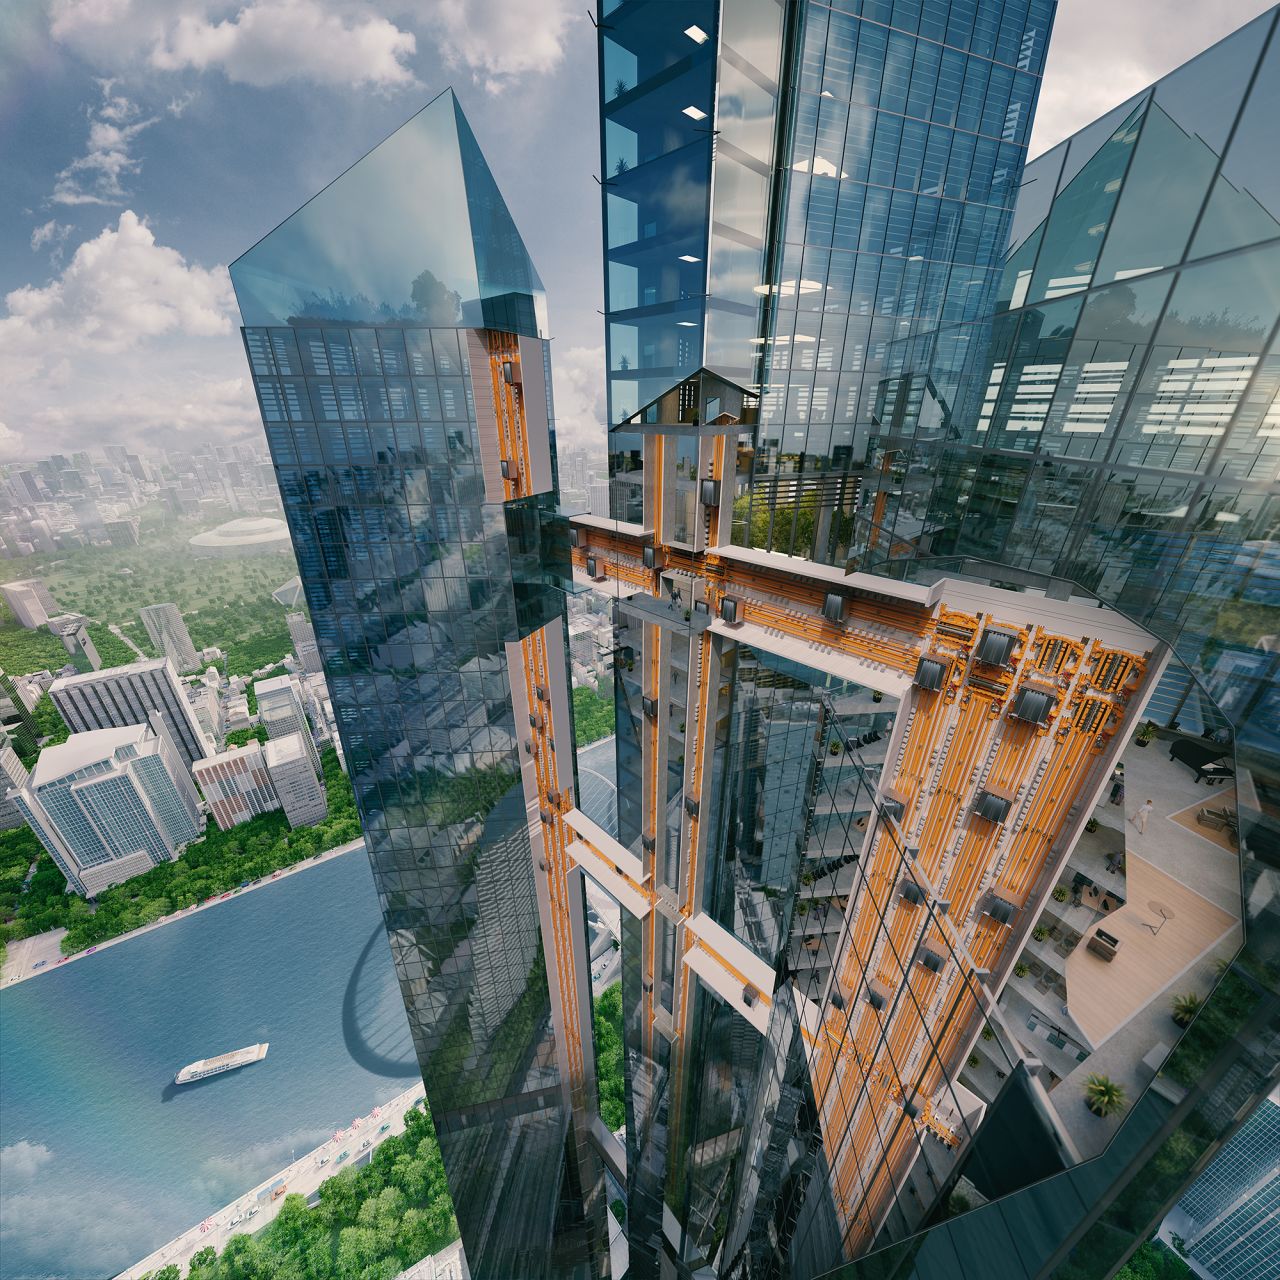 Instead of simply going up and down, elevators of the future will go sideways as well. Elevator manufacturers Thyssenkrupp are developing the <a href="https://multi.thyssenkrupp-elevator.com" target="_blank" target="_blank">MULTI</a>, which scraps traditional cable systems in favor of magnetic levitation, allowing the elevator to move horizontally as well as vertically. According to Thyssenkrupp, the elevators will be faster, lighter and less energy-intensive than conventional models, and will open up a new world of possibilities for architects and designers.